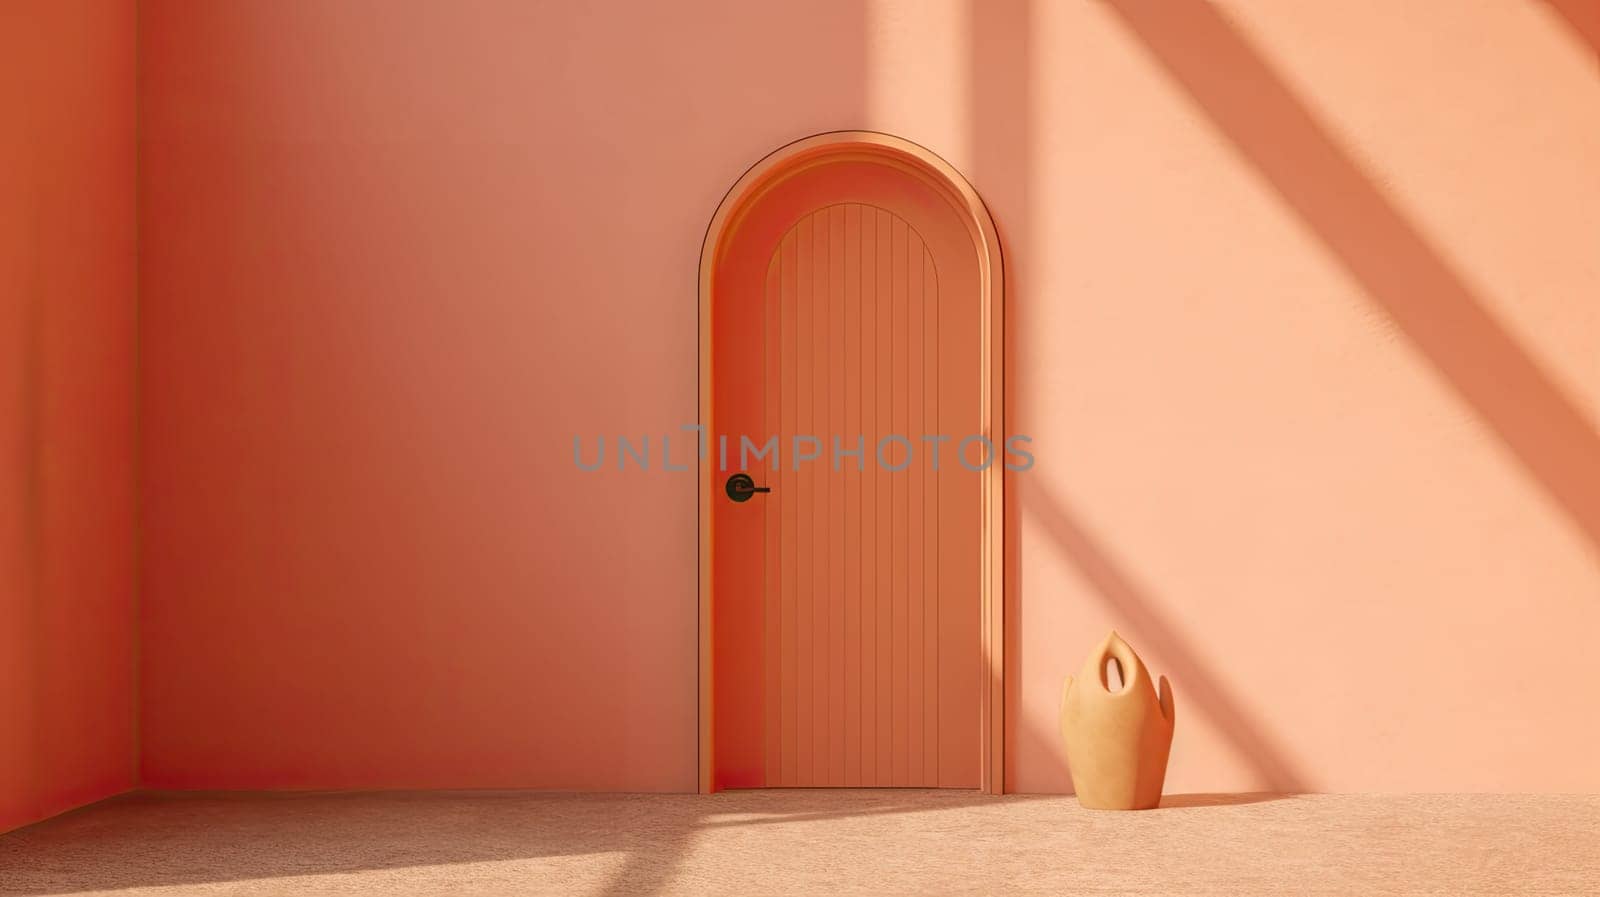 Background for your product. Plastered wall, door and shadows